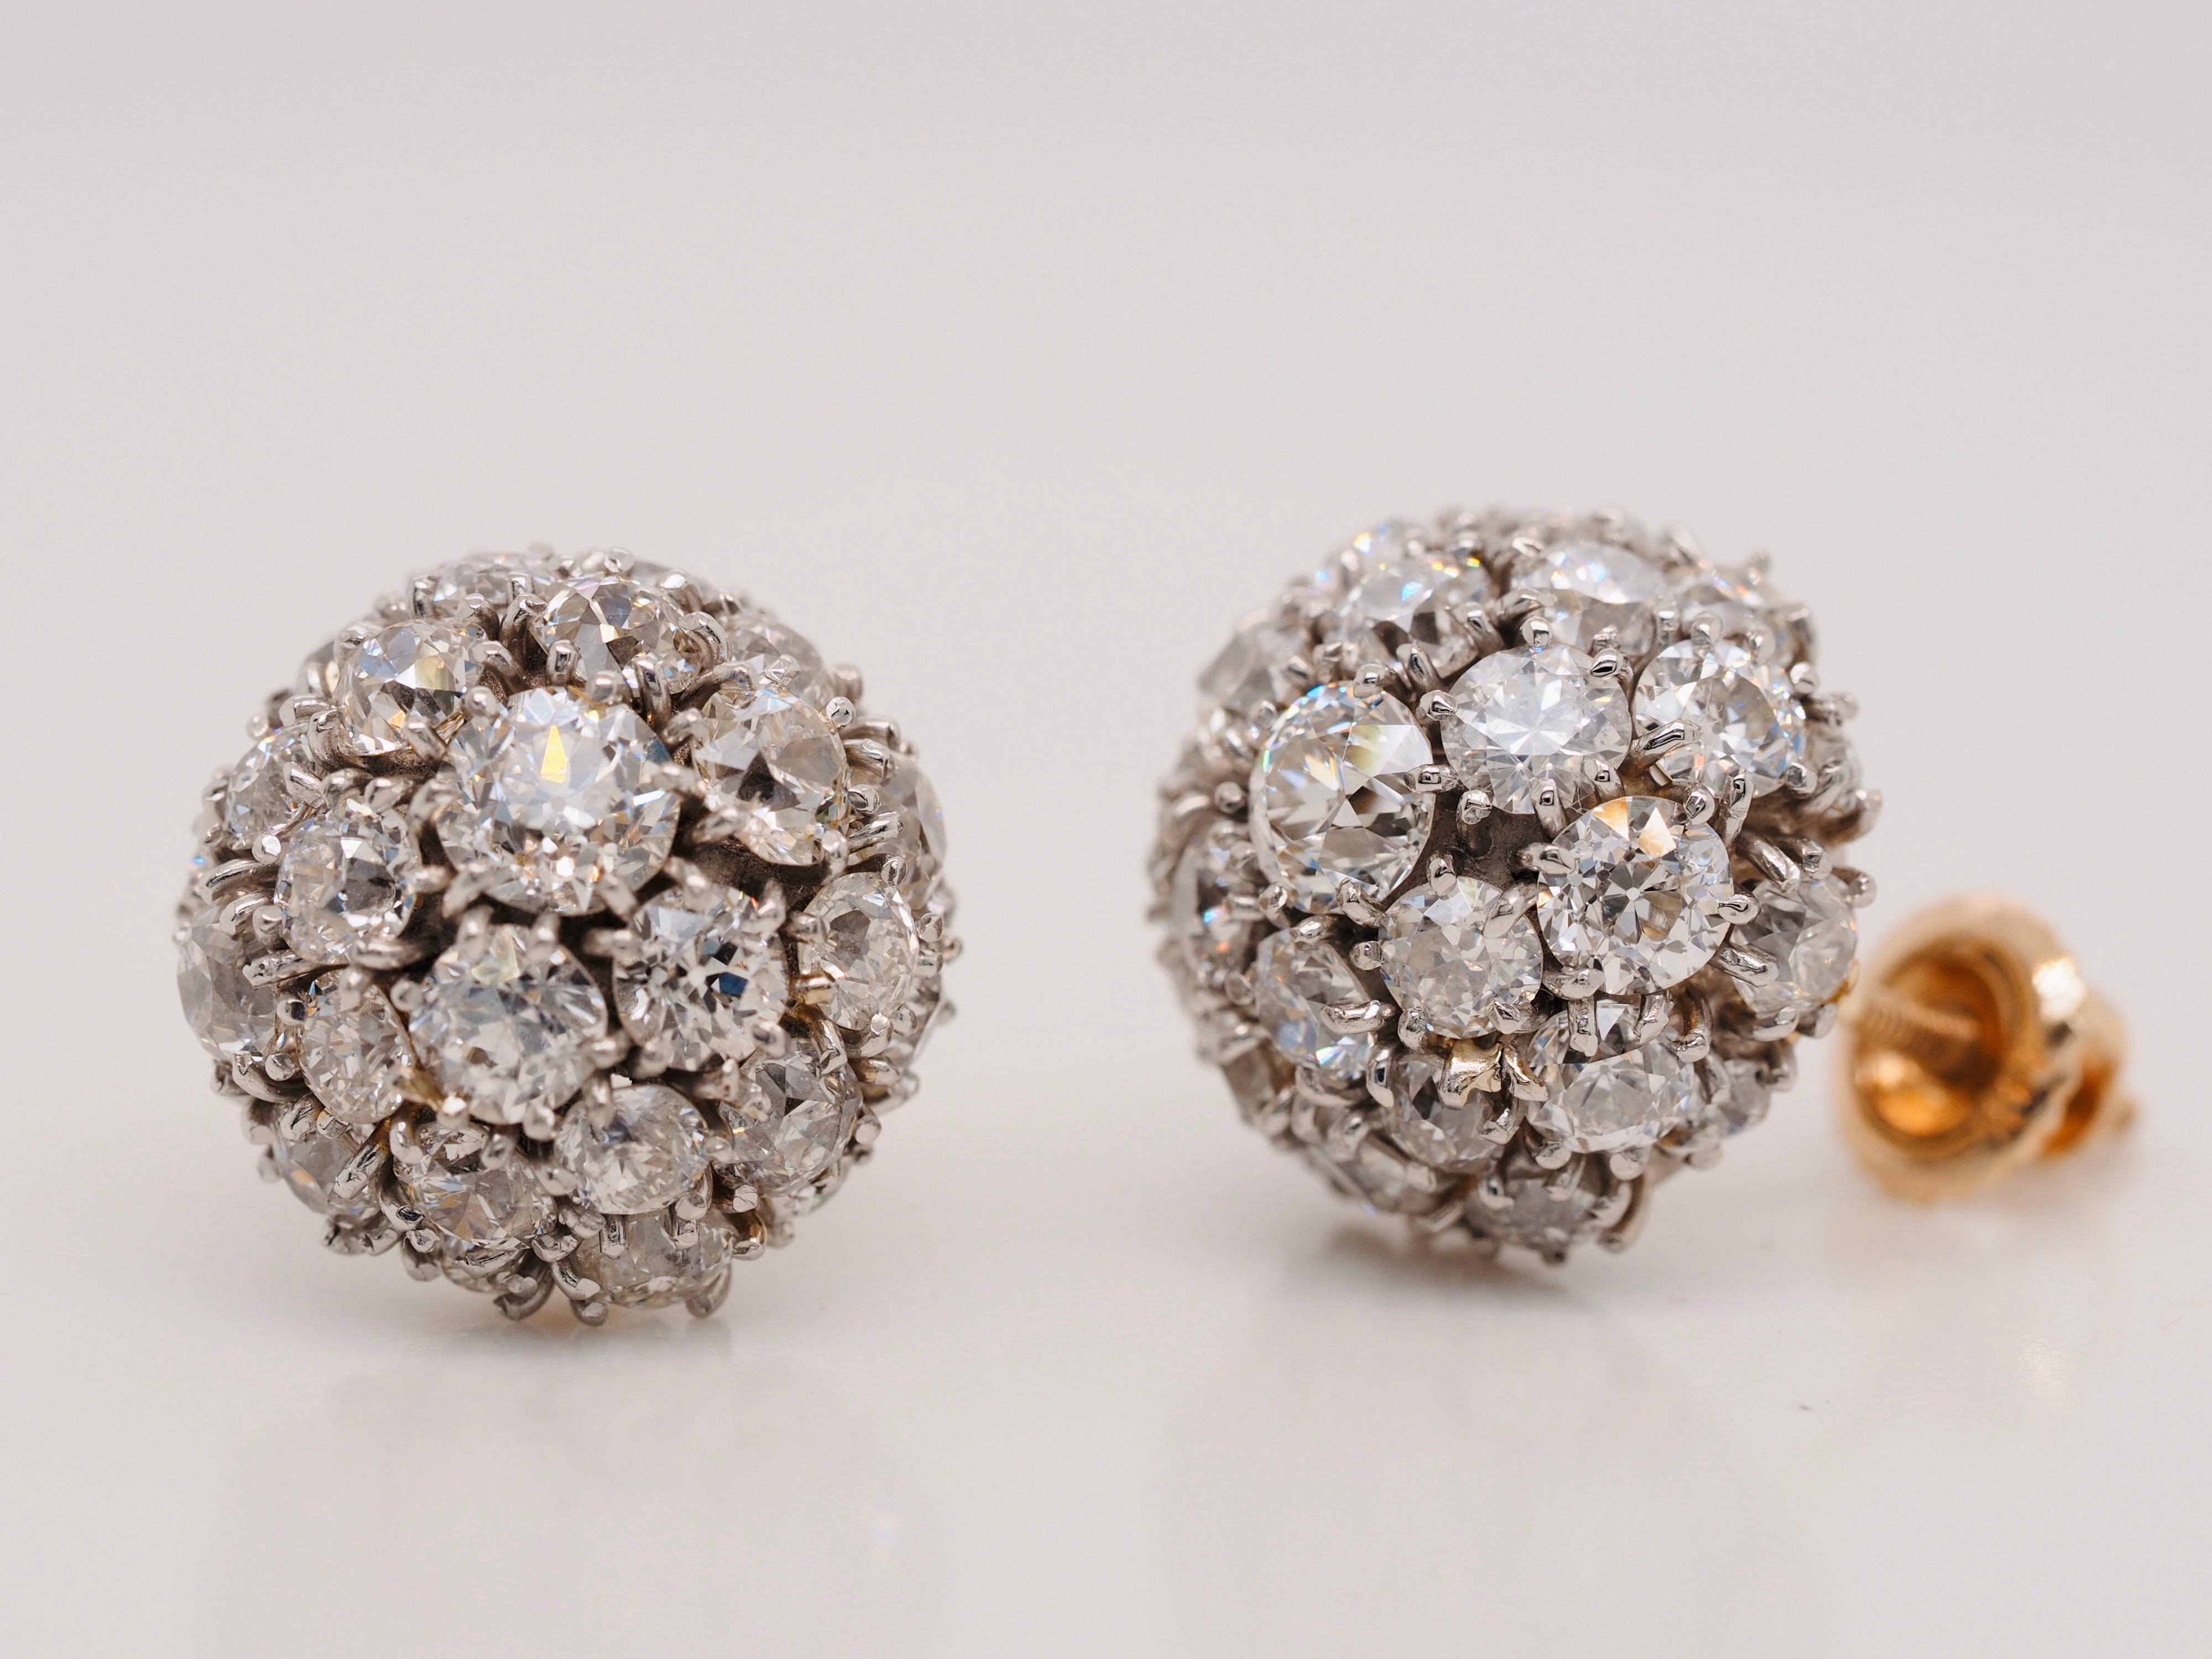 These incredible dome shaped vintage diamond earrings are illuminating with 7.00CTW carats of old European cut diamonds. The diamonds vary from 2 to 4mm in size. Each stone is individually prong set sitting on a layer of platinum giving it the